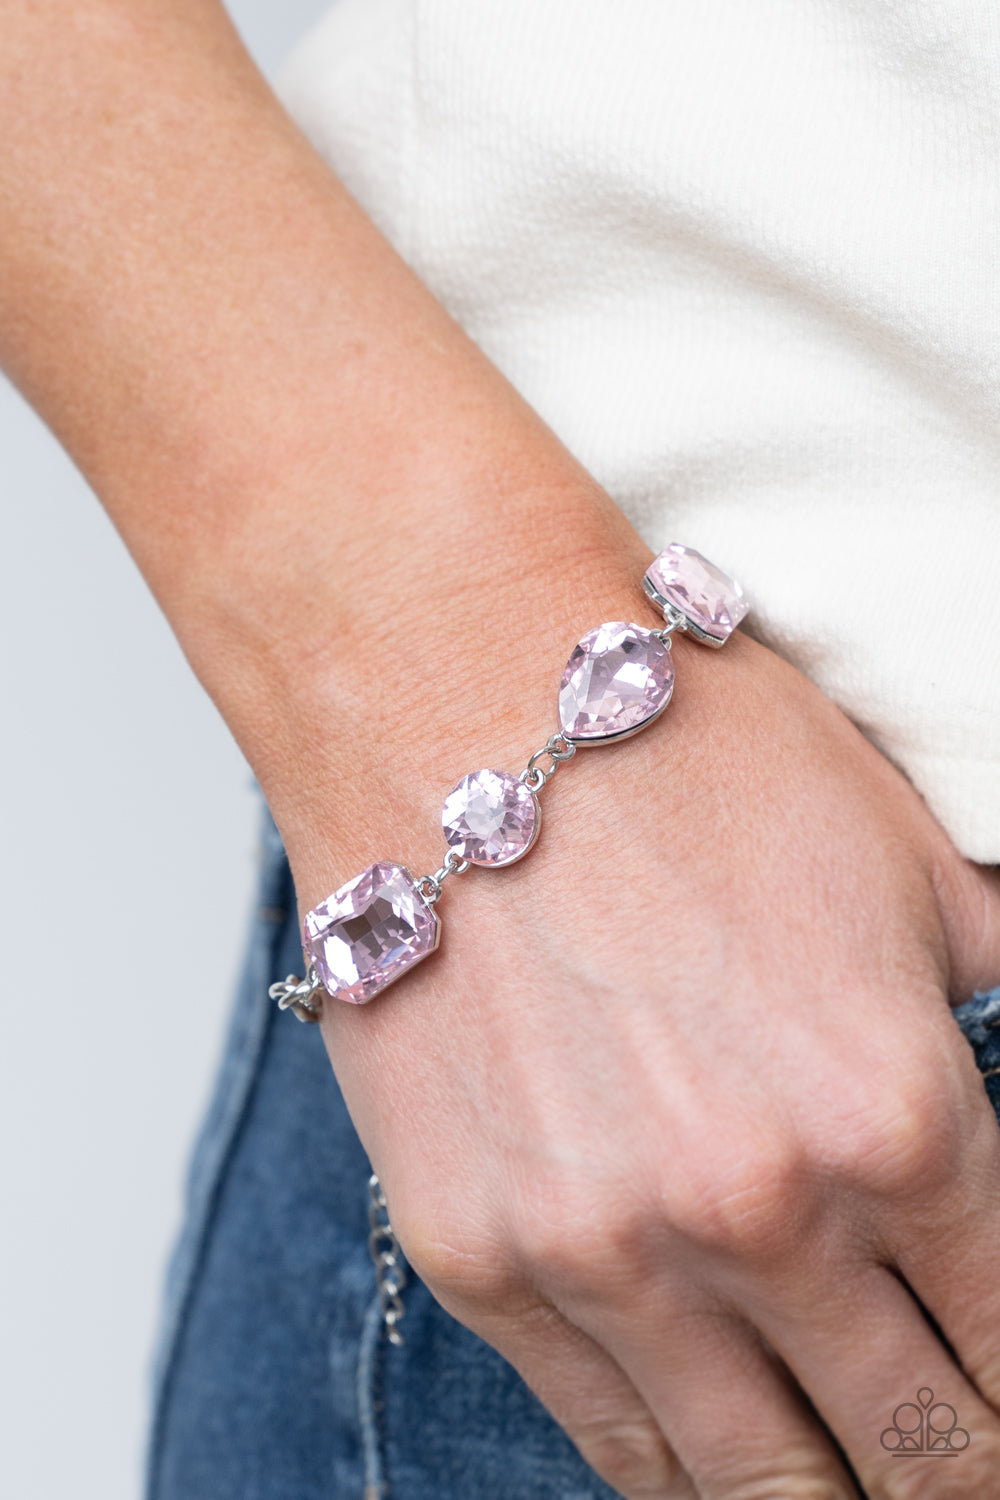 Paparazzi Jewelry & Accessories - Cosmic Treasure Chest - Pink Bracelet. Bling By Titia Boutique